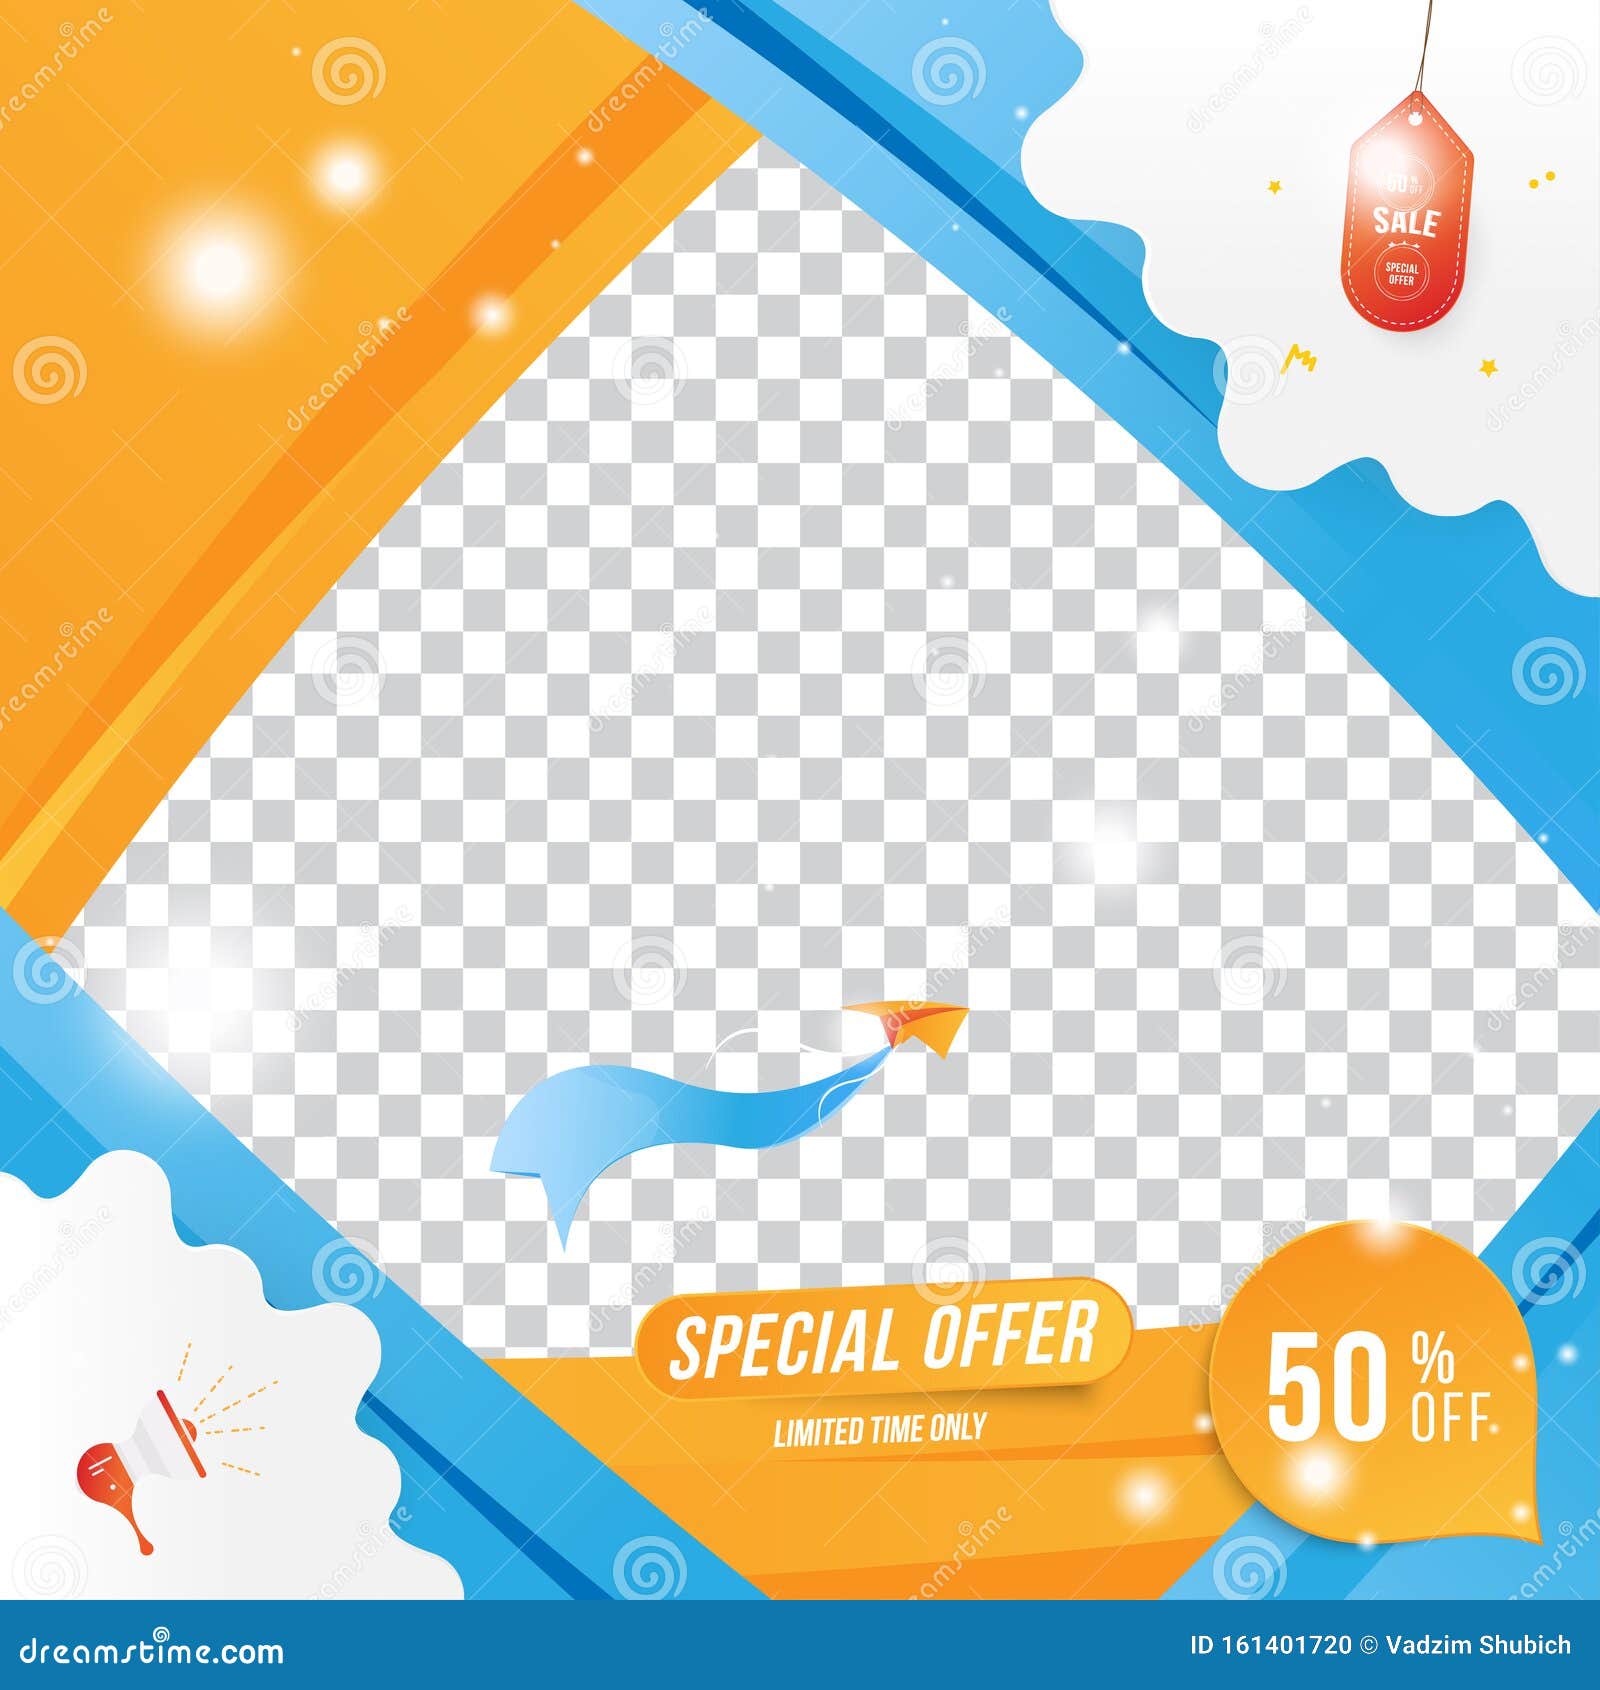 Banner for Social Page. Special Offer Mega Sale 50 Plane with Loudspeaker  on the Transparent Background of Clouds Cut Out of Paper Stock Illustration  - Illustration of shop, plane: 161401720